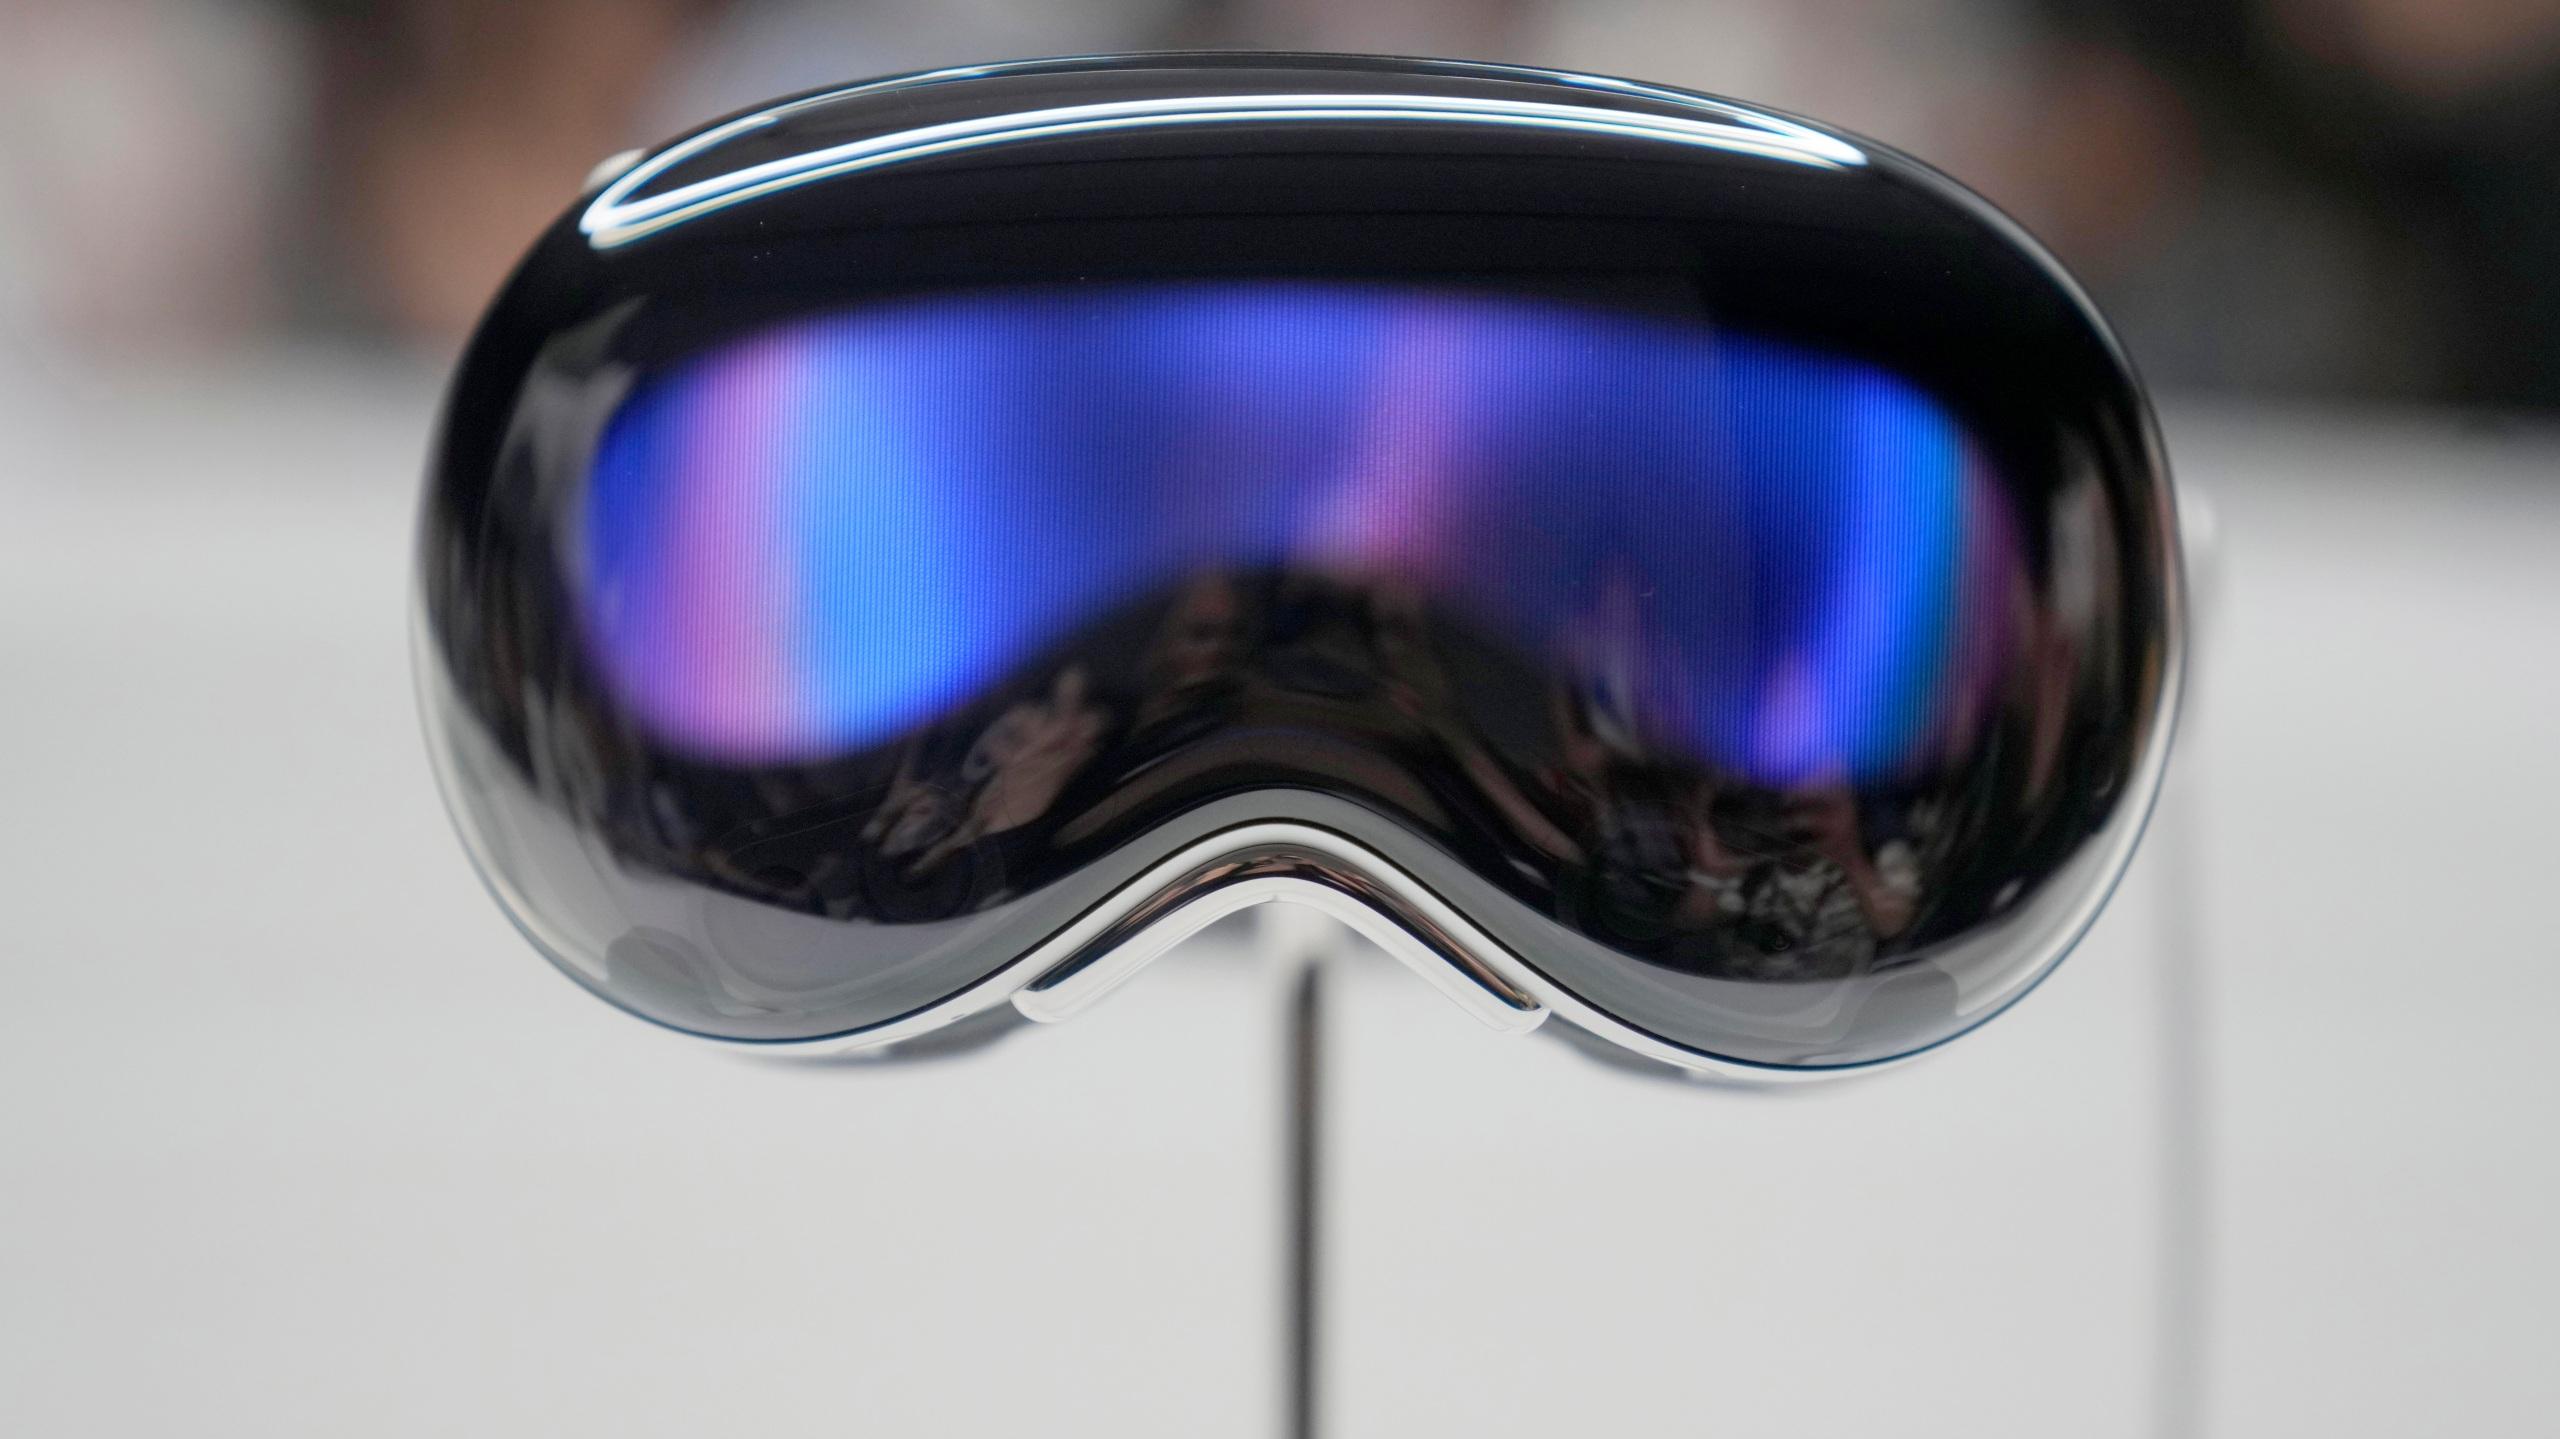 Apple S Vision Pro Goggles Unleash A Mixed Reality That Could Lead